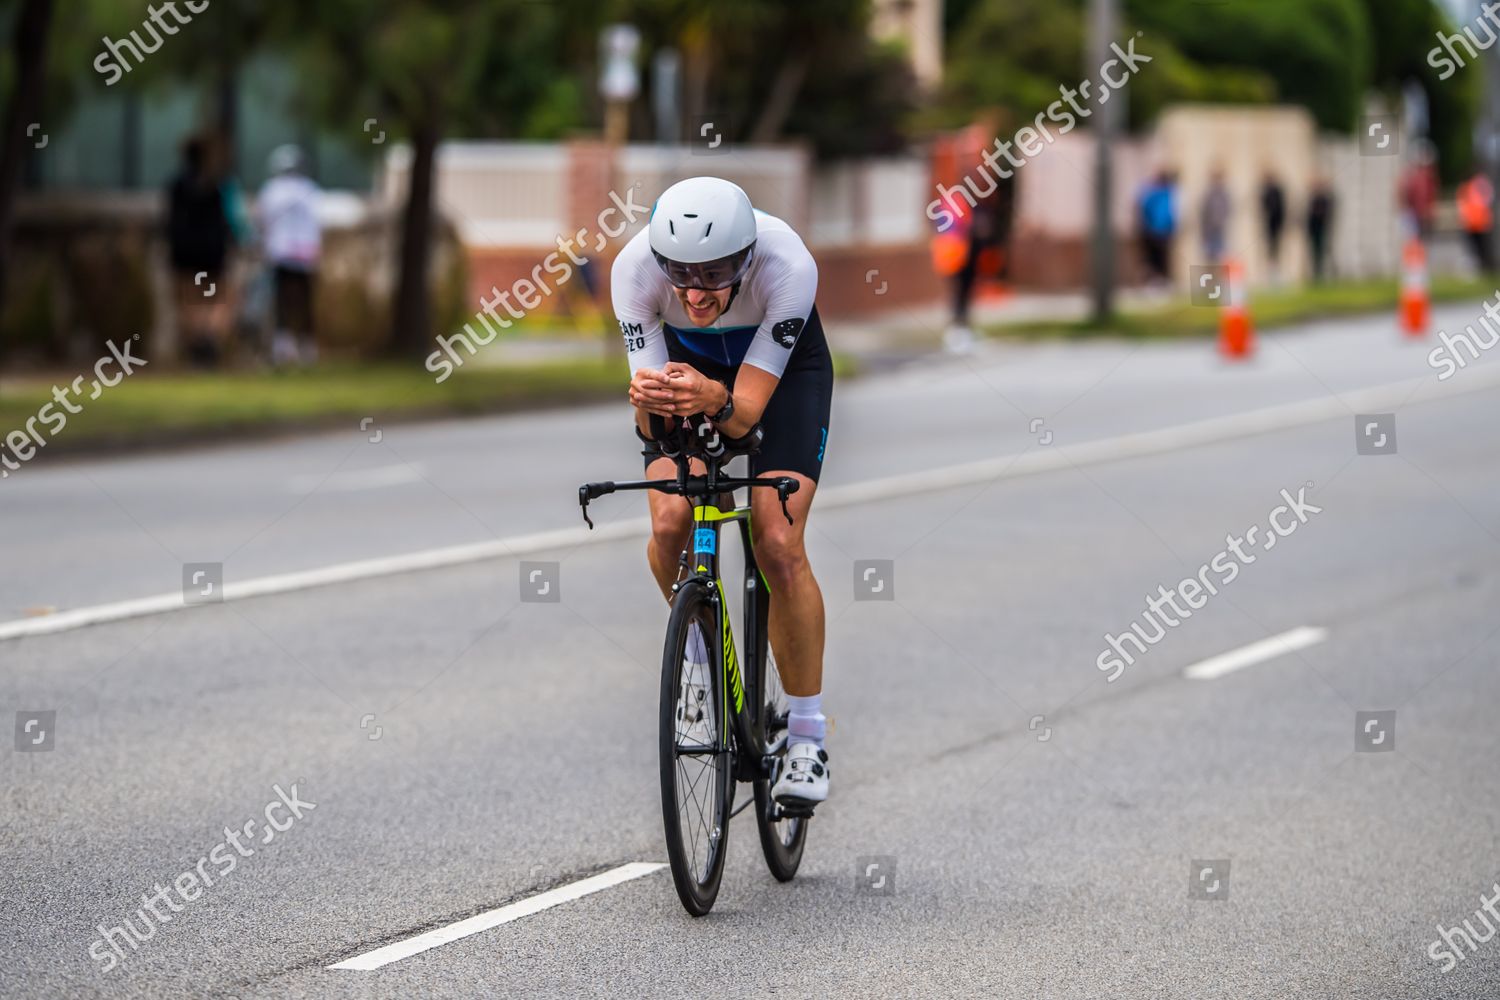 Prøve surfing skak Olympic Distance triathlete Martin Sprong riding his Editorial Stock Photo  - Stock Image | Shutterstock